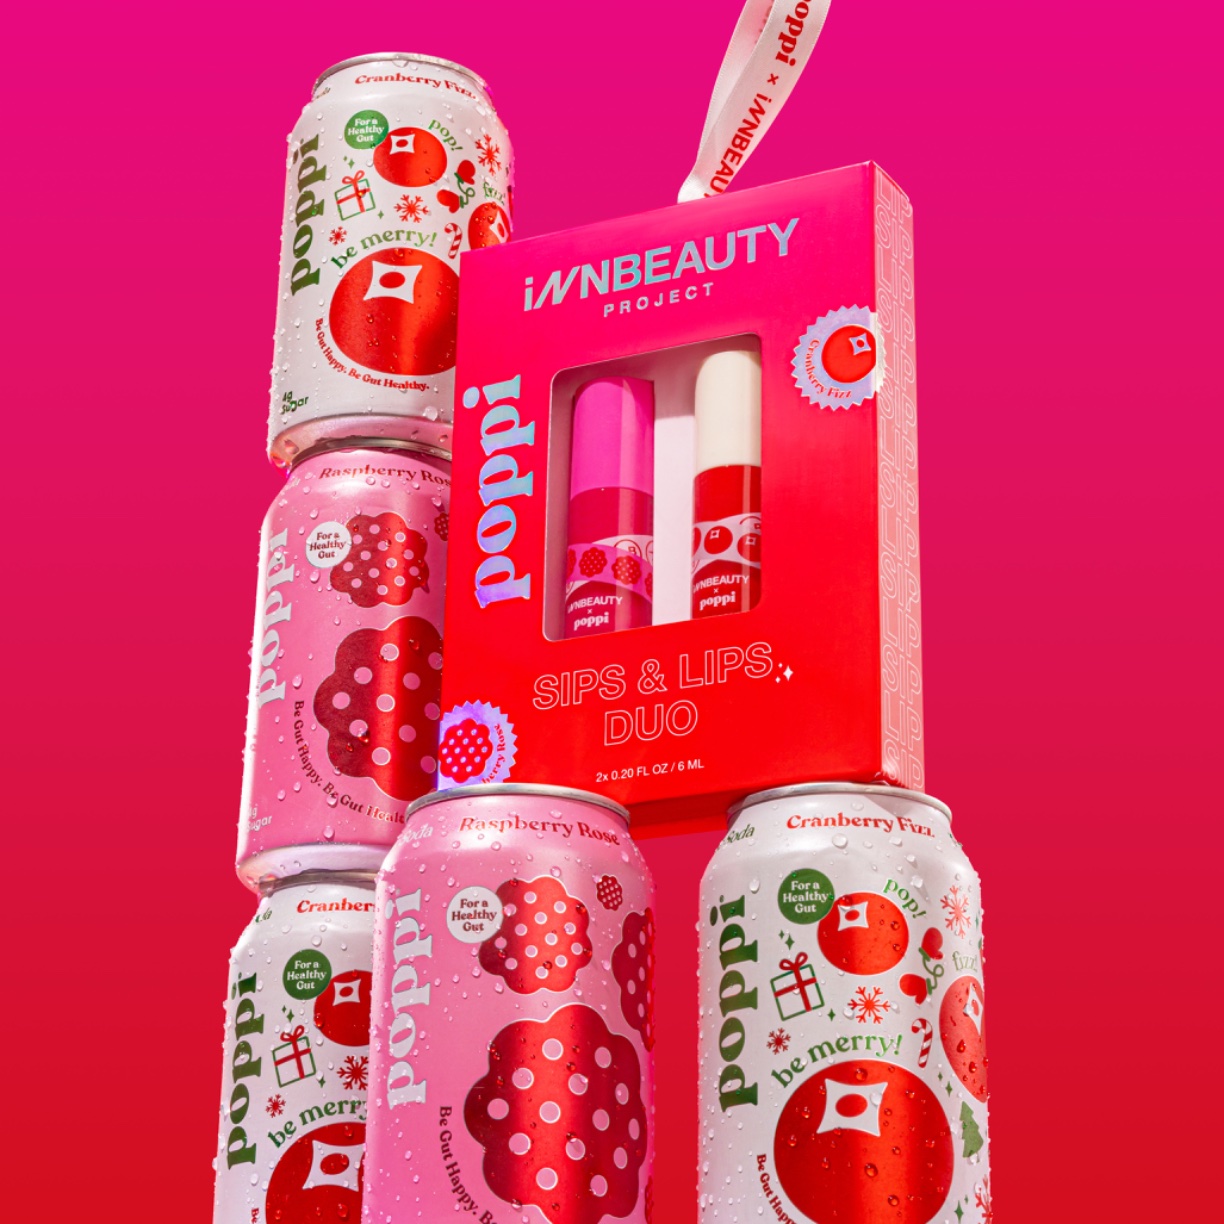 INNBEAUTY Project x poppi Sips & Lips Duo And Their Sensorial Campaign